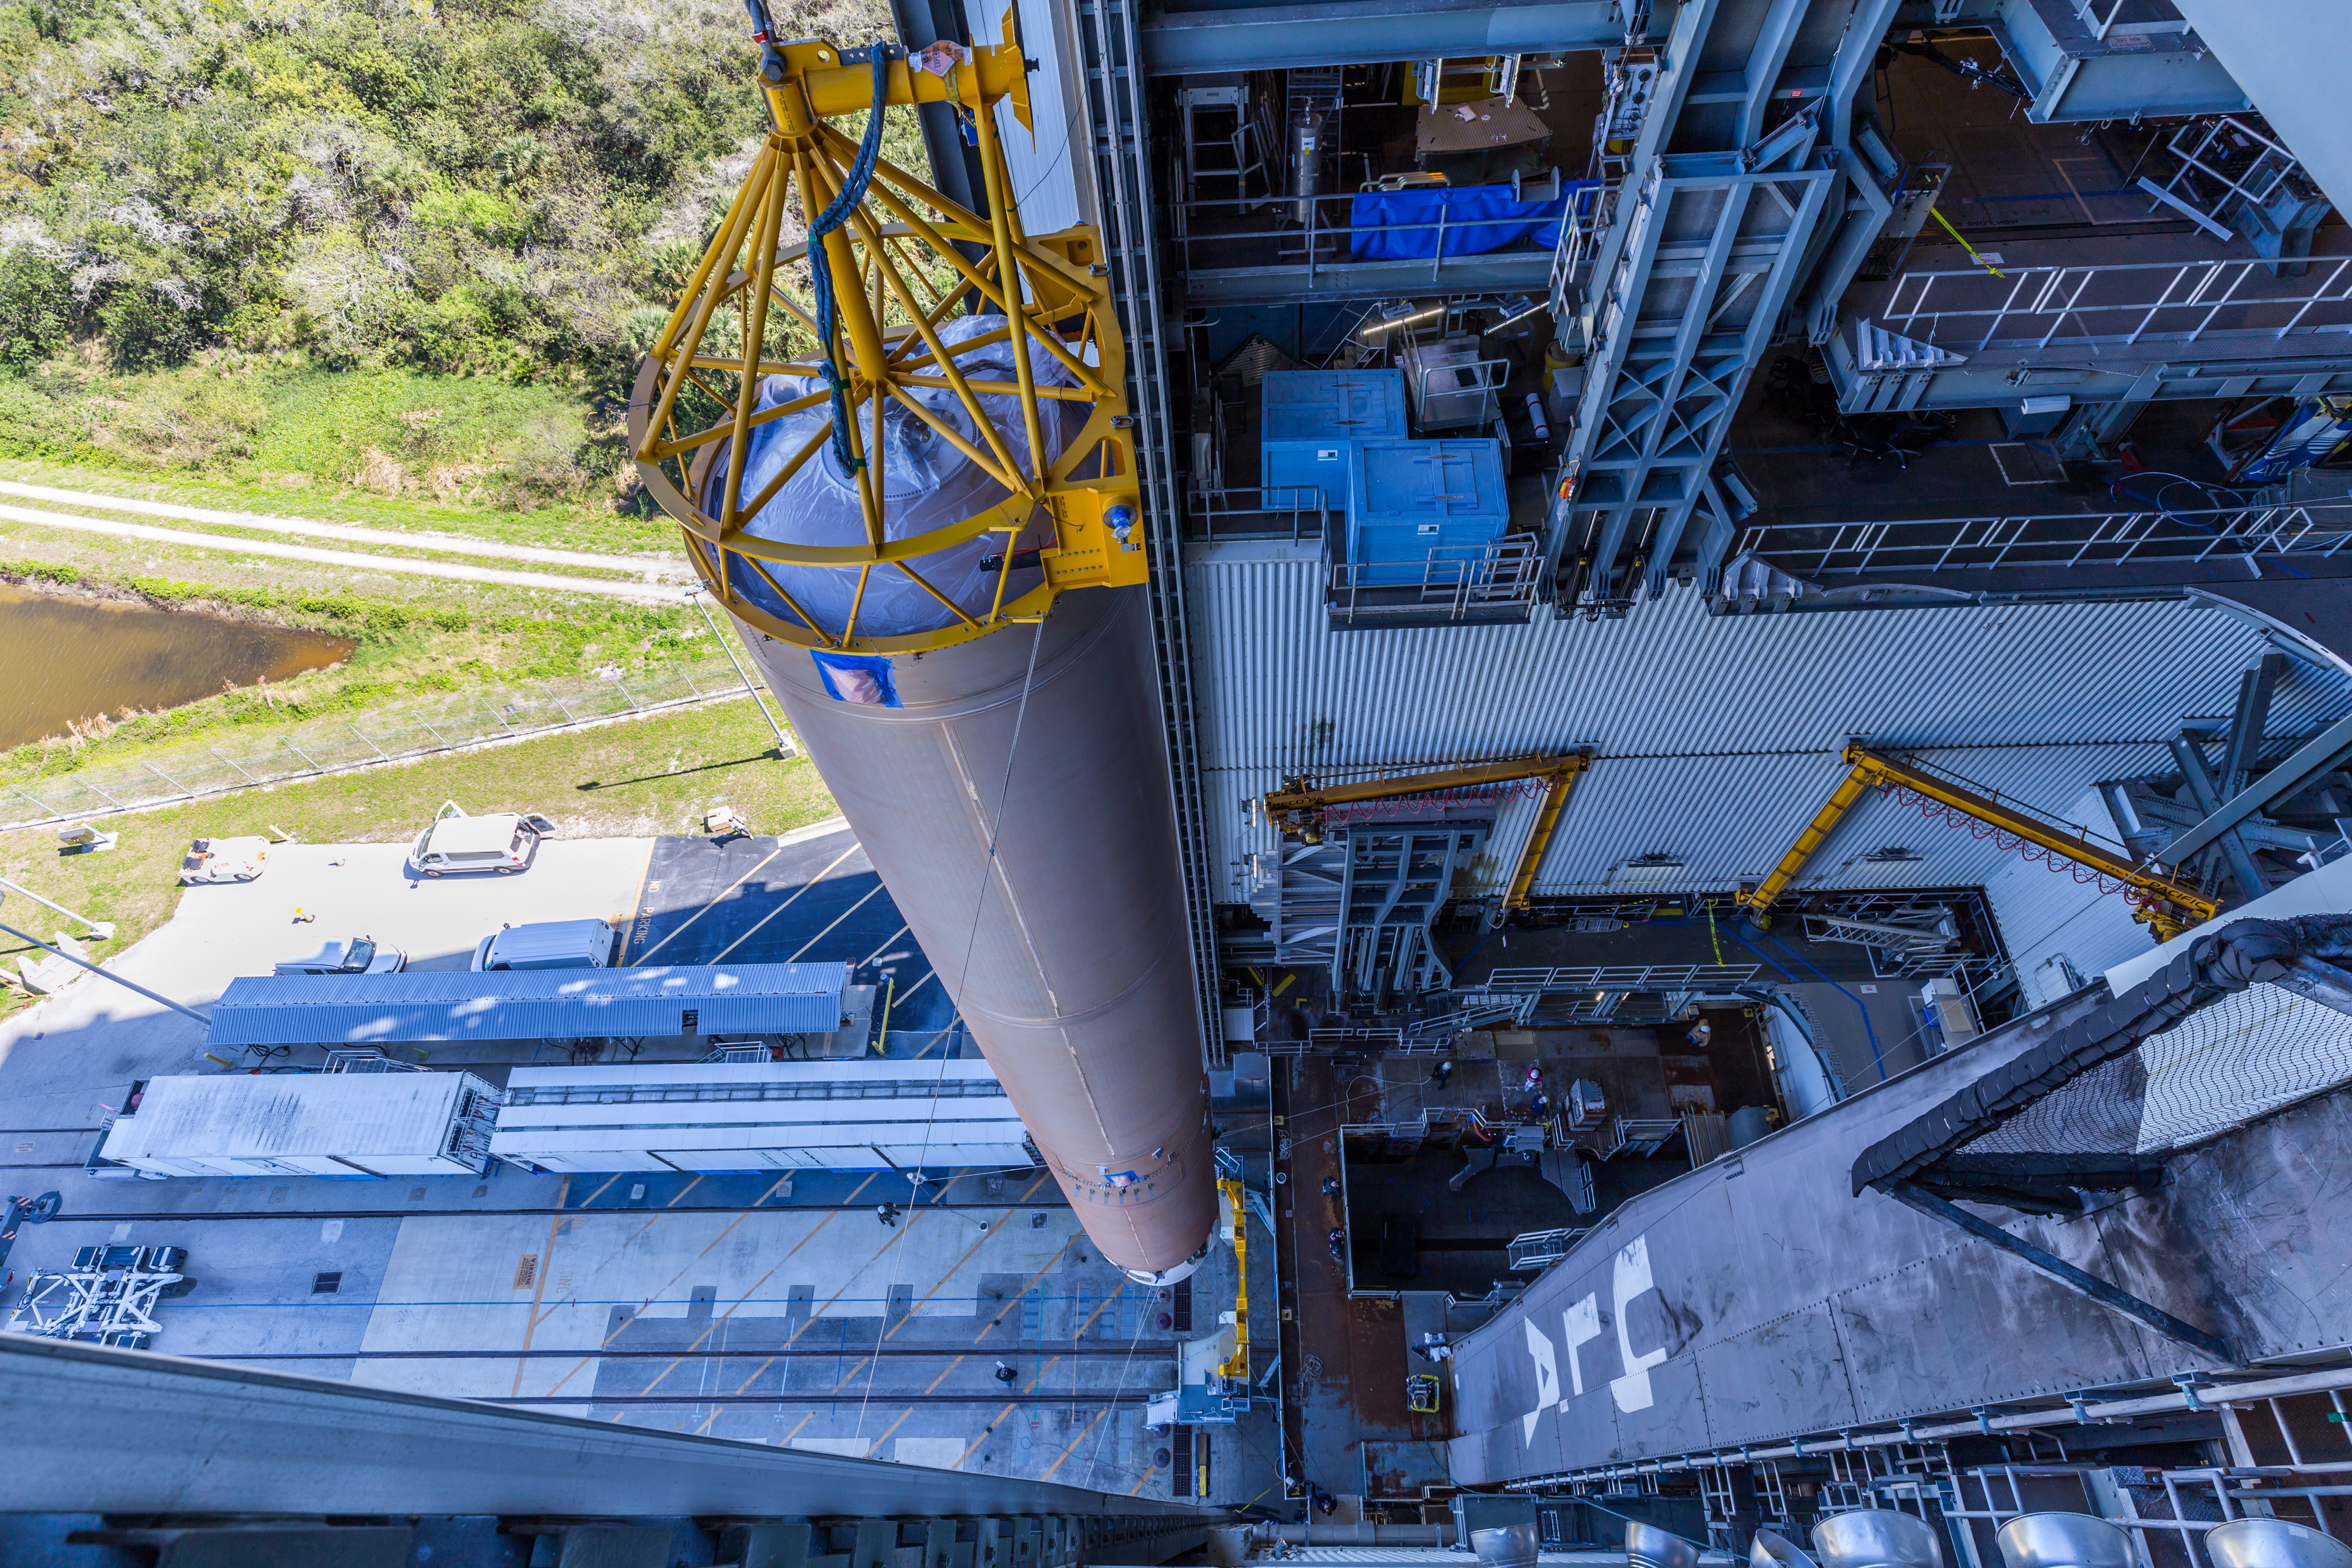 The Atlas V first stage to launch CFT is hoisted into the Vertical Integration Facility. Photo by United Launch Alliance